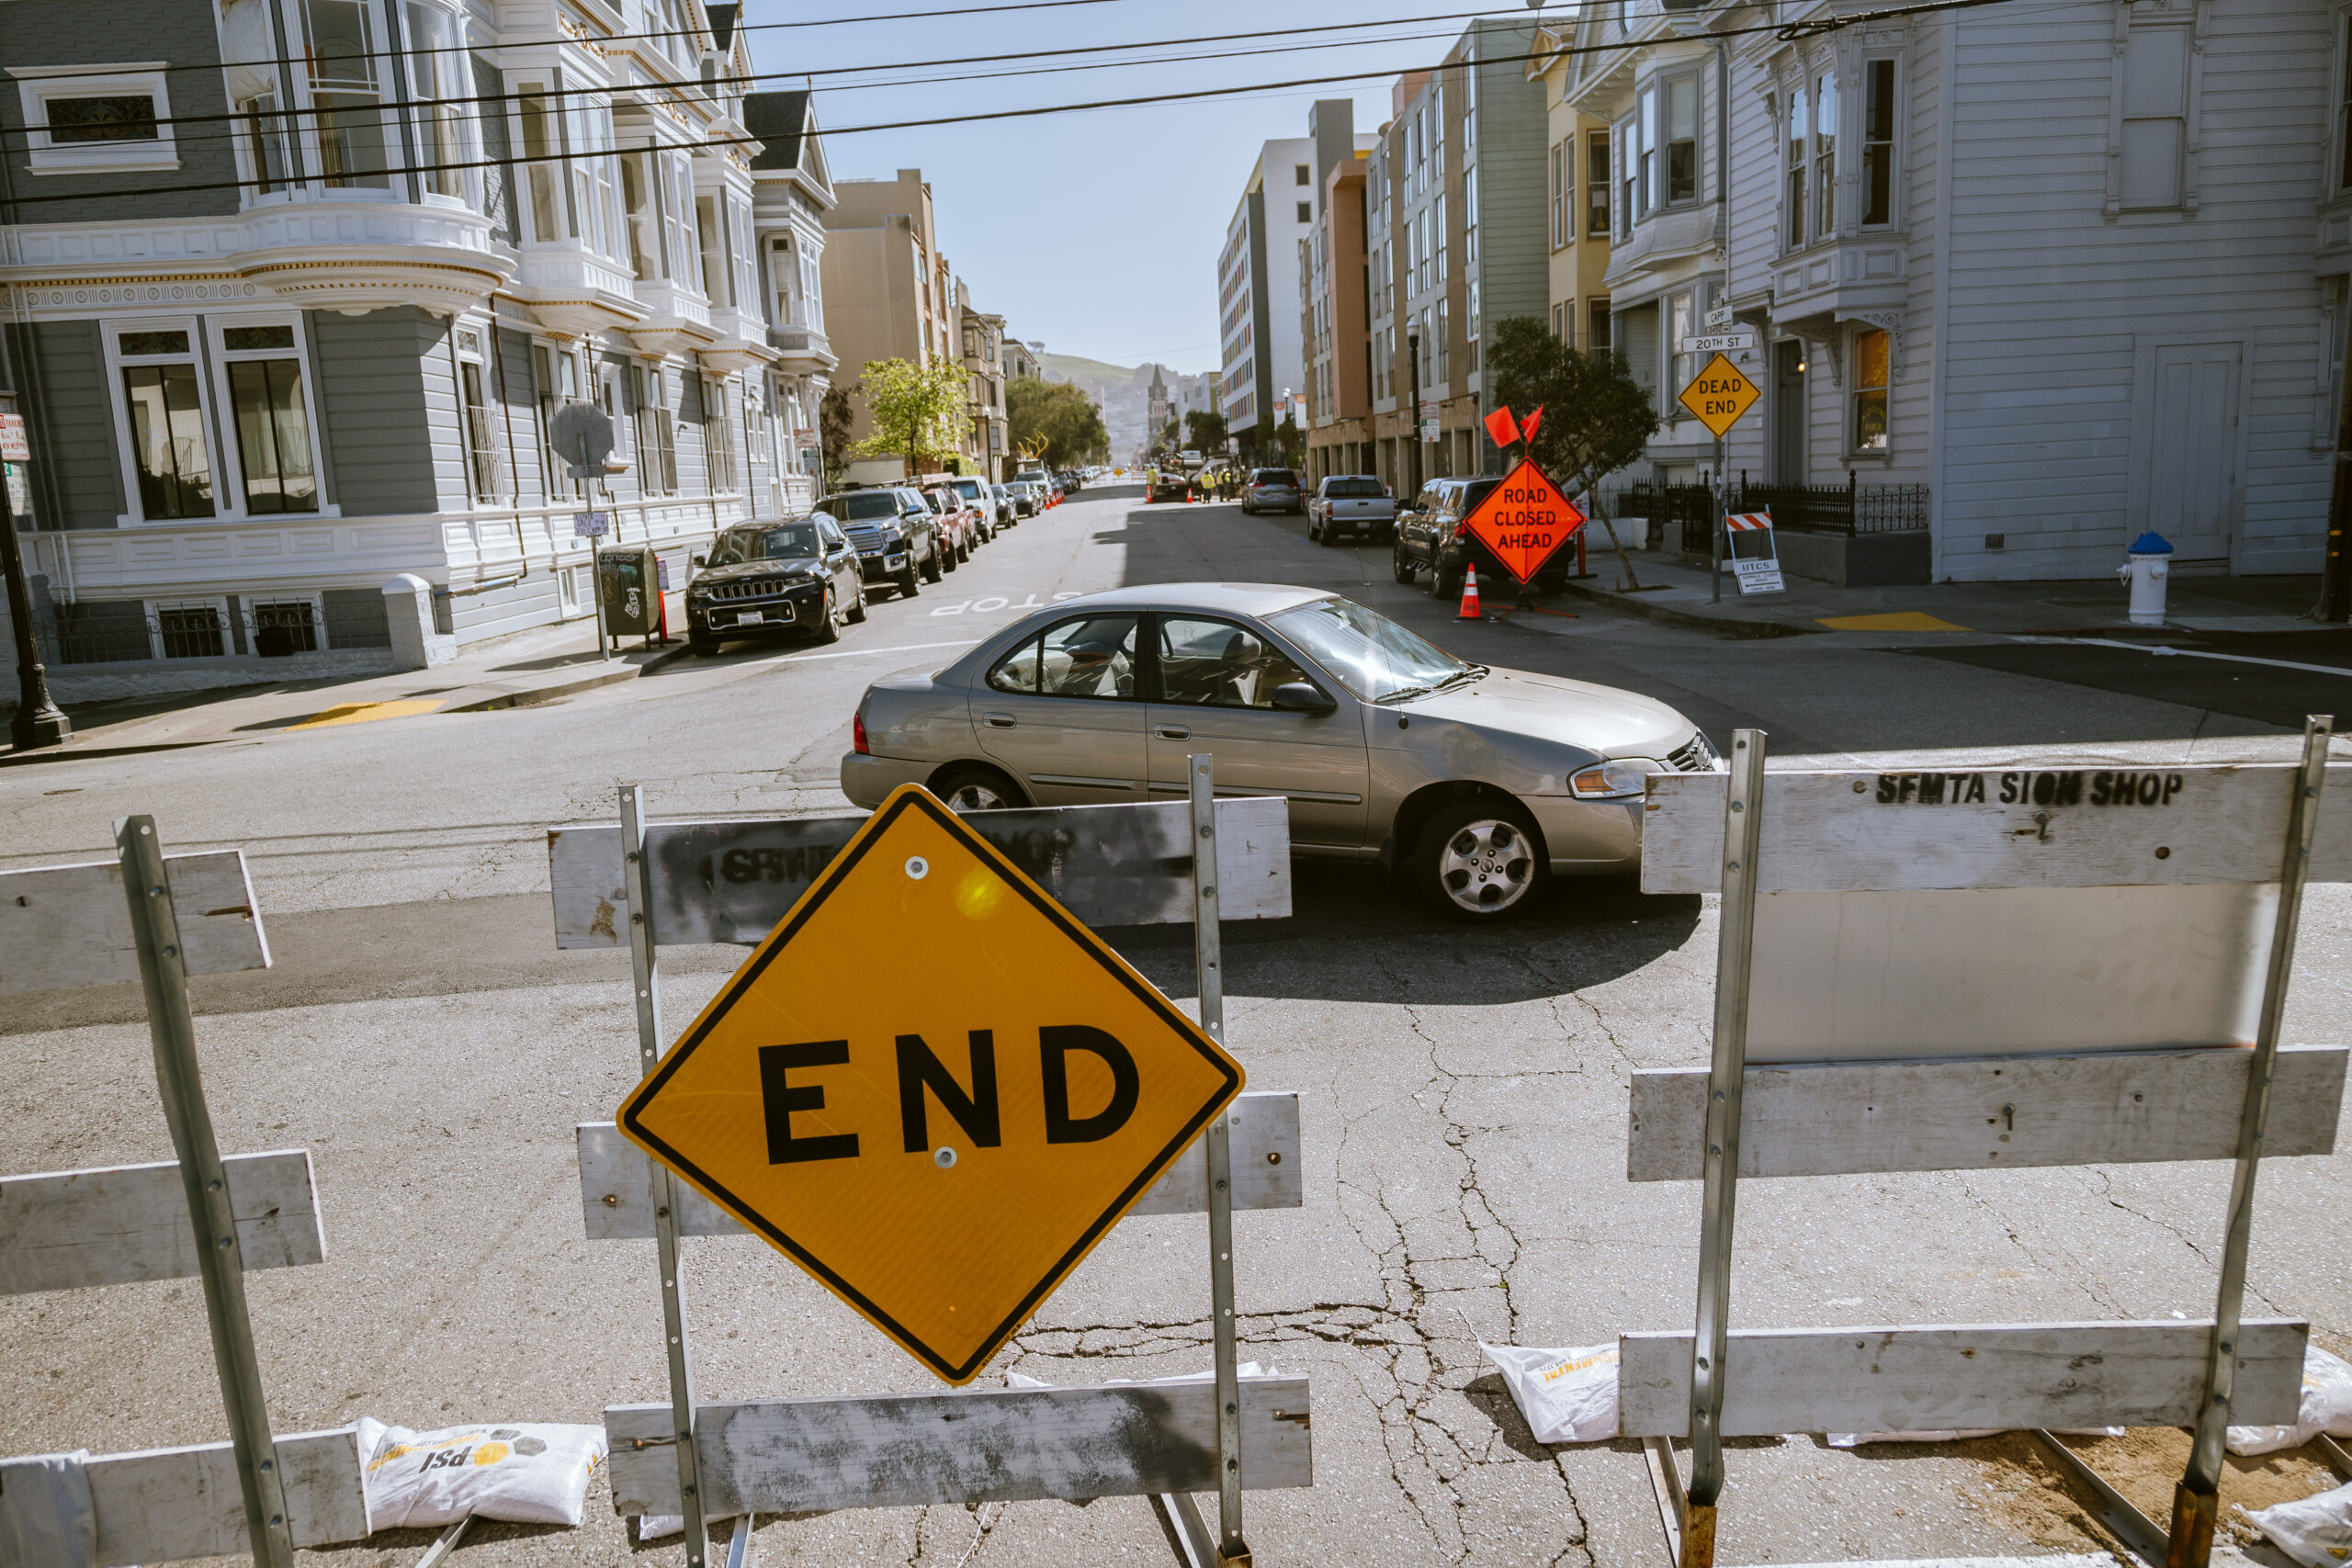 An "end" sign is attached to a barrier blocking a road in San Francisco.